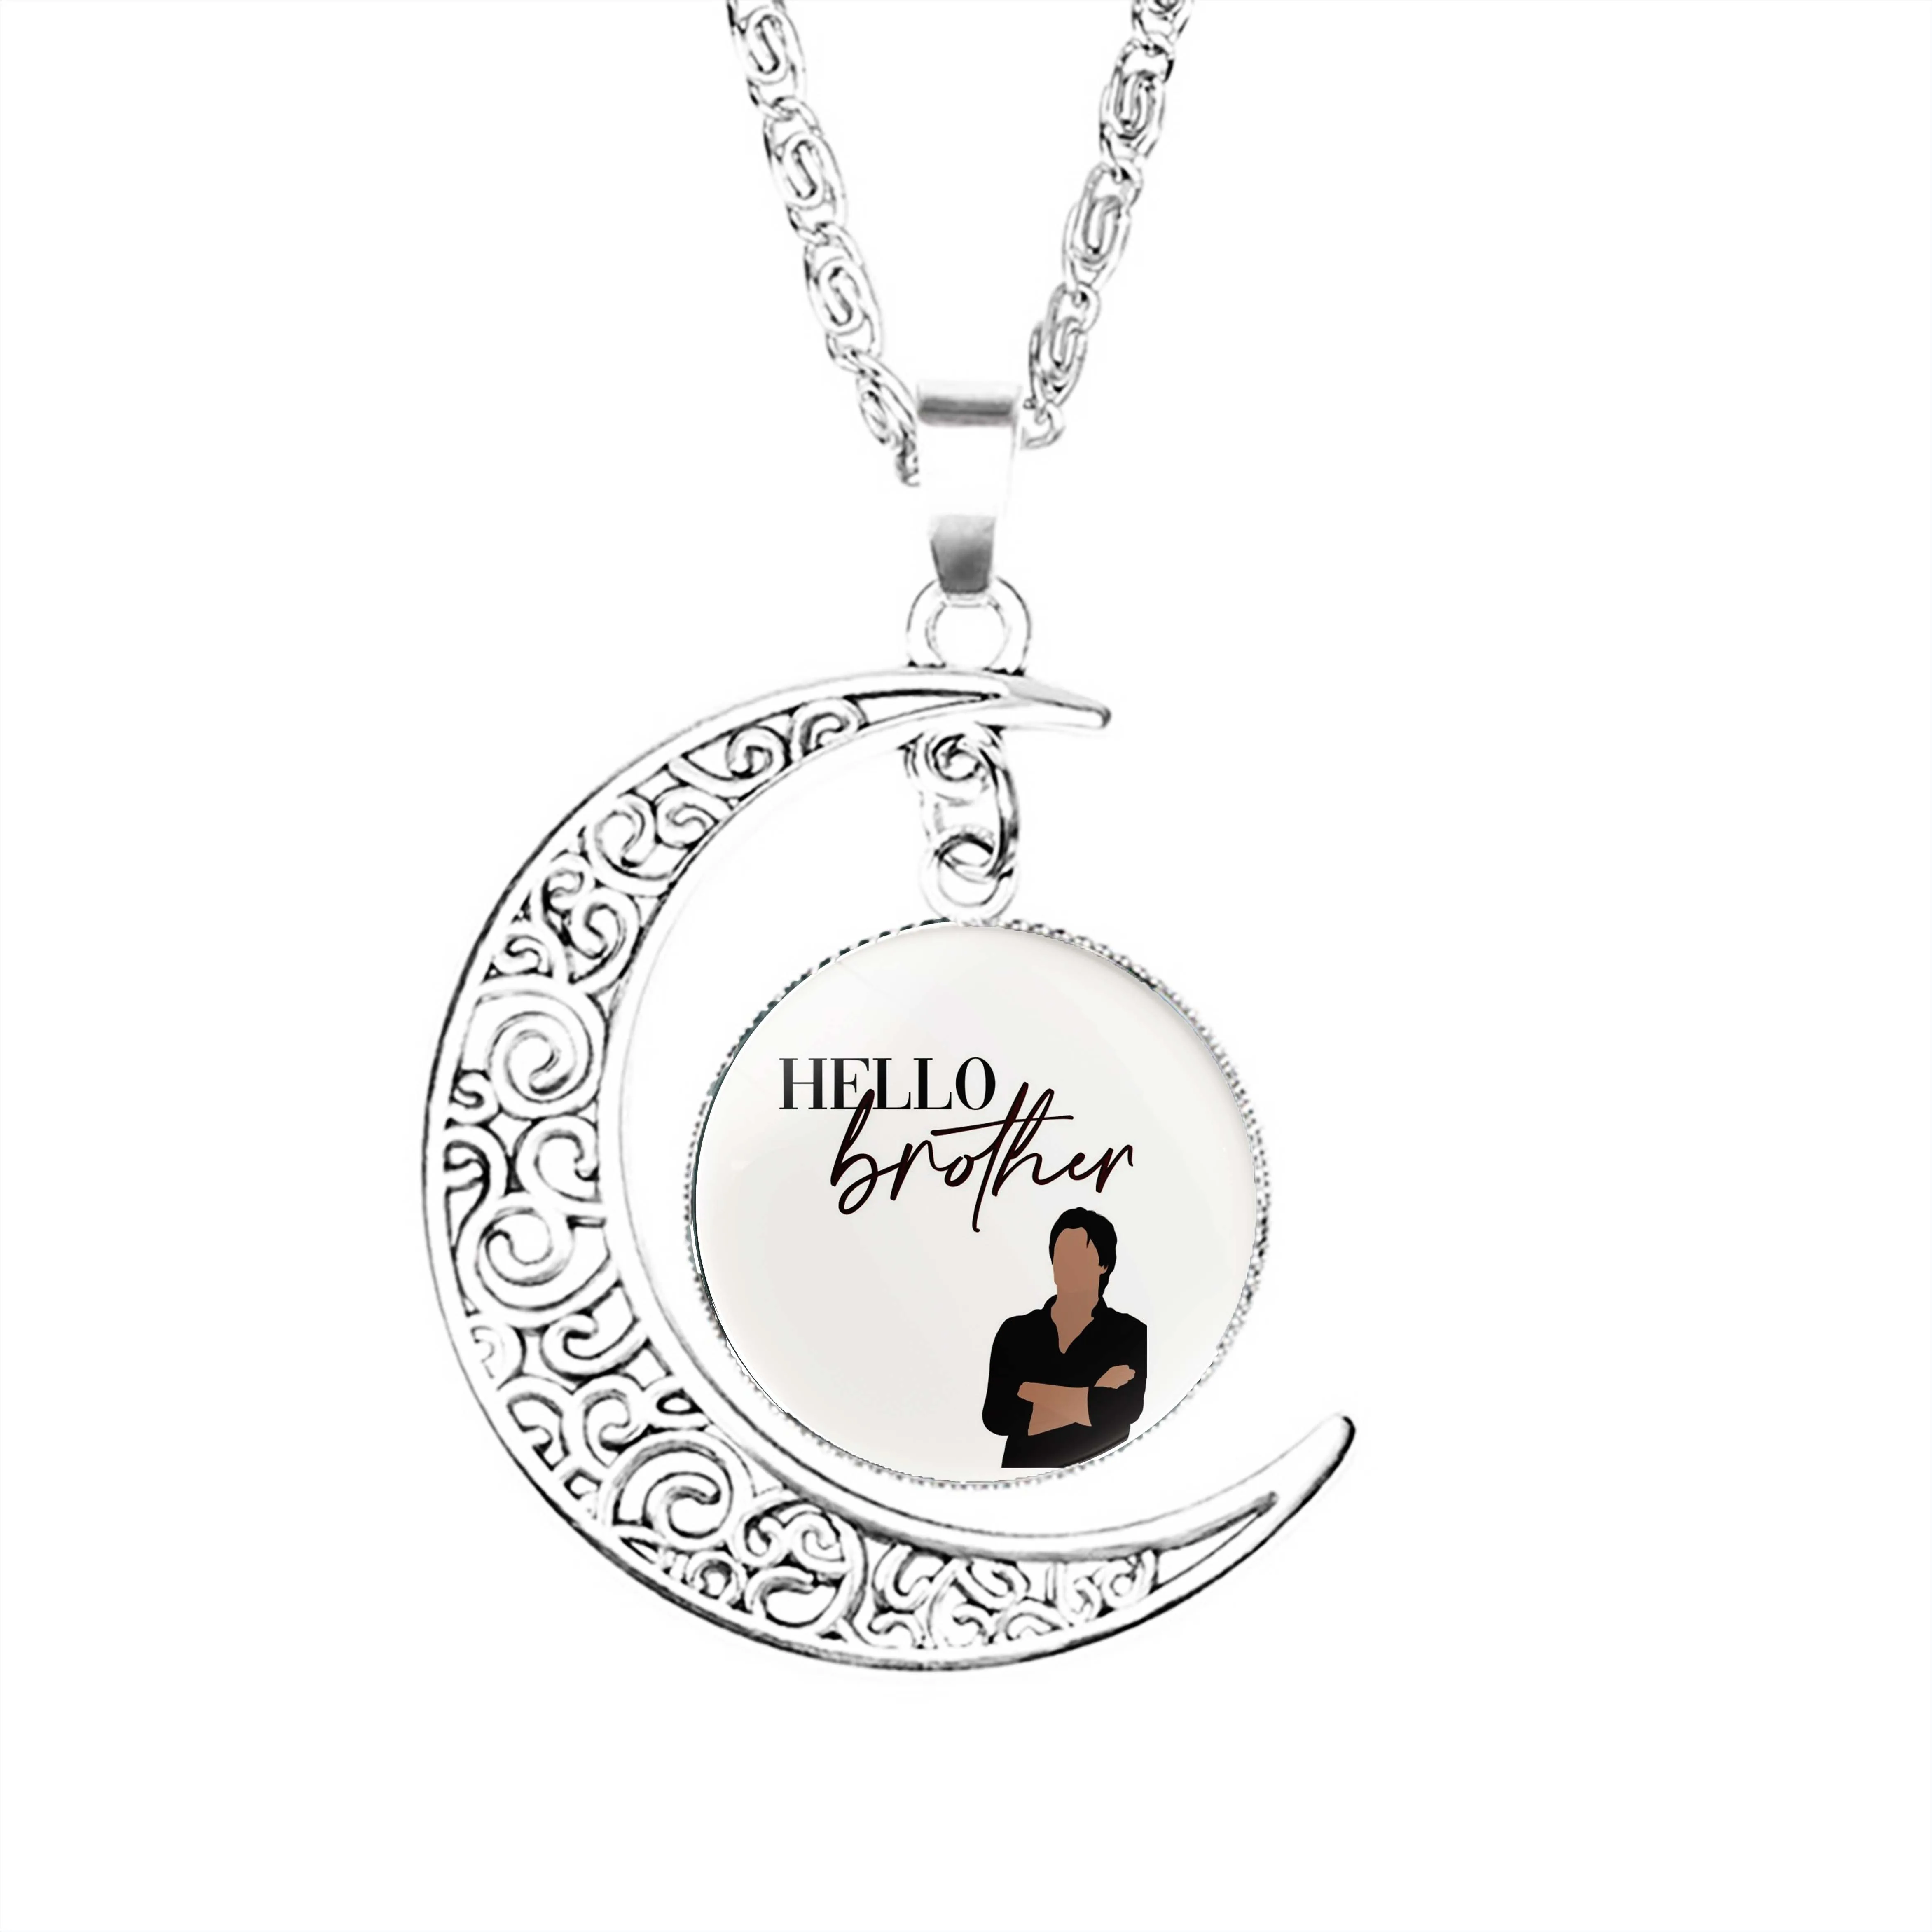 Hello Brother Damon Salvatore Vampire Diaries  Moon Necklace Charm Jewelry Glass Fashion Pendant Accessories Party Lady Jewelry